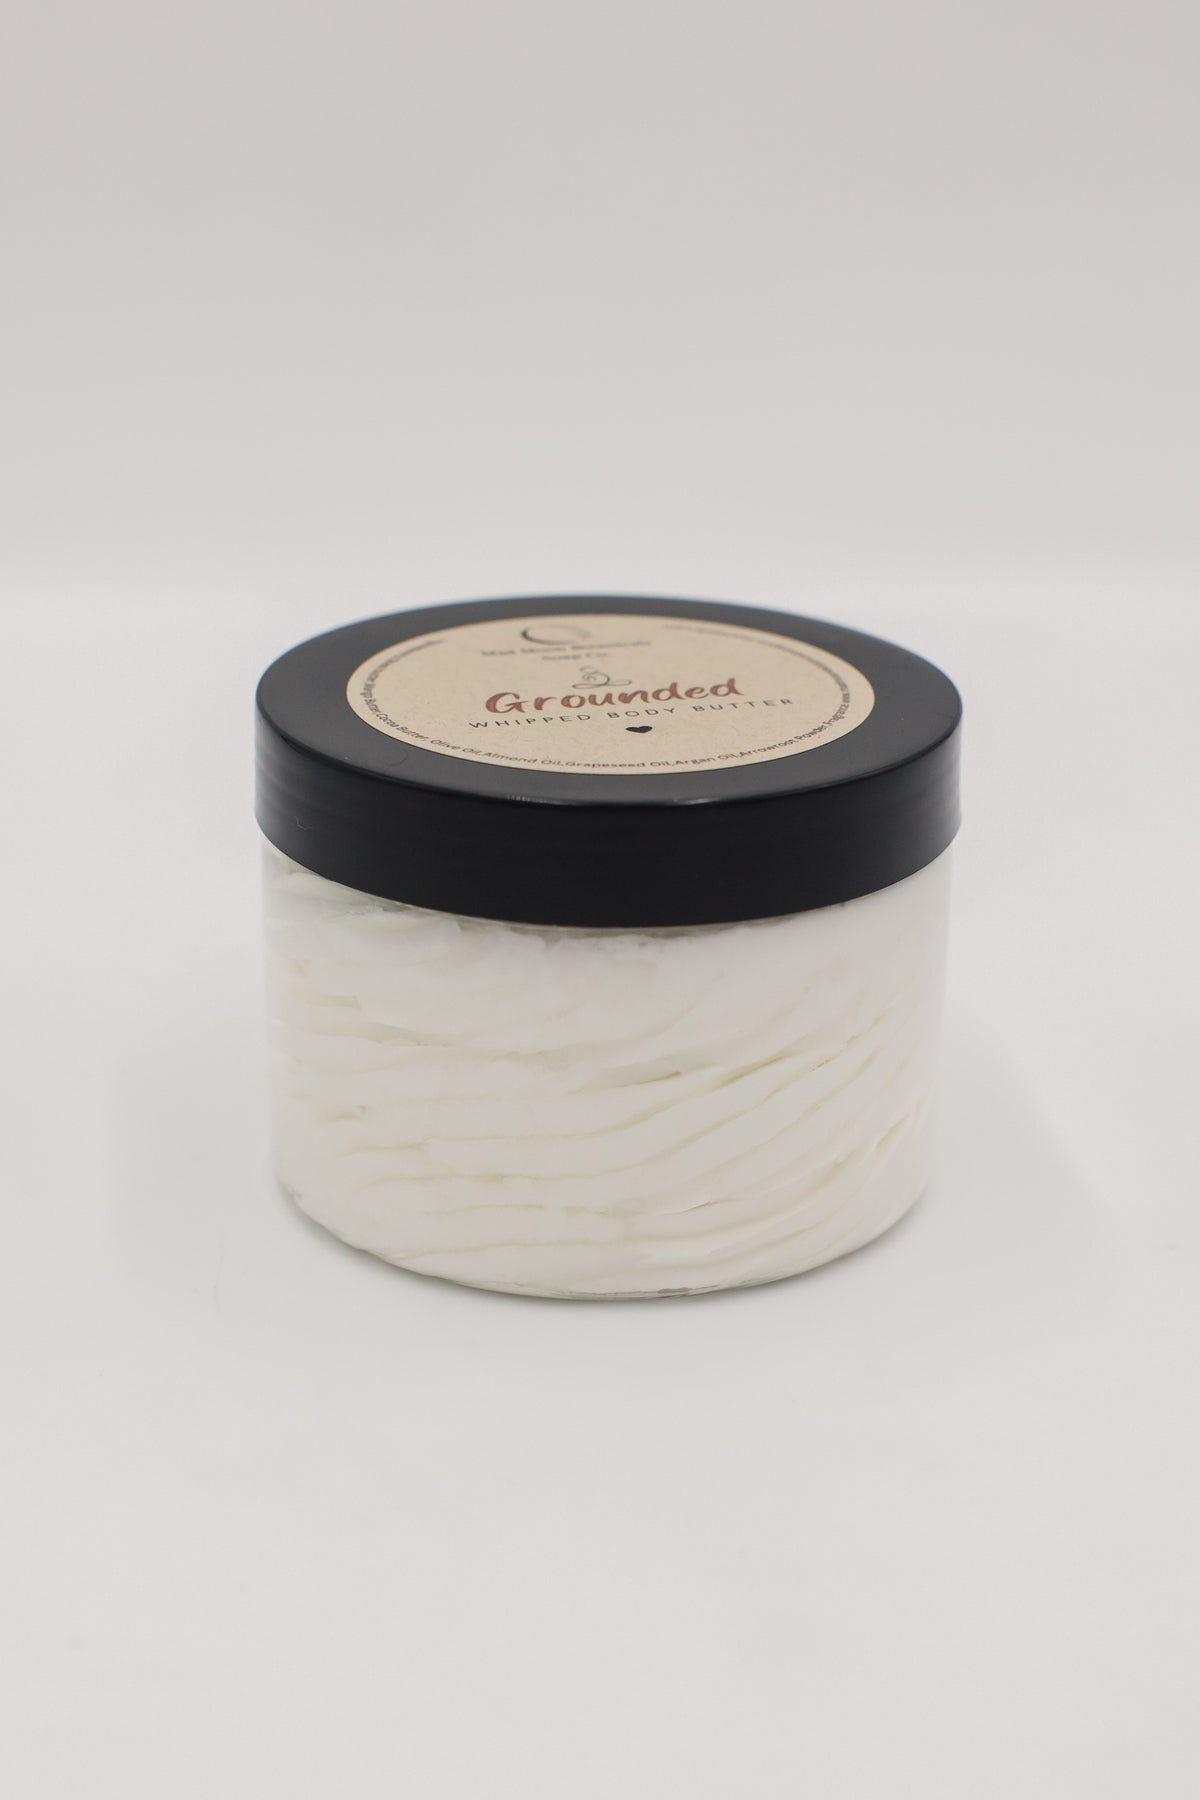 Grounded Whipped Body Butter